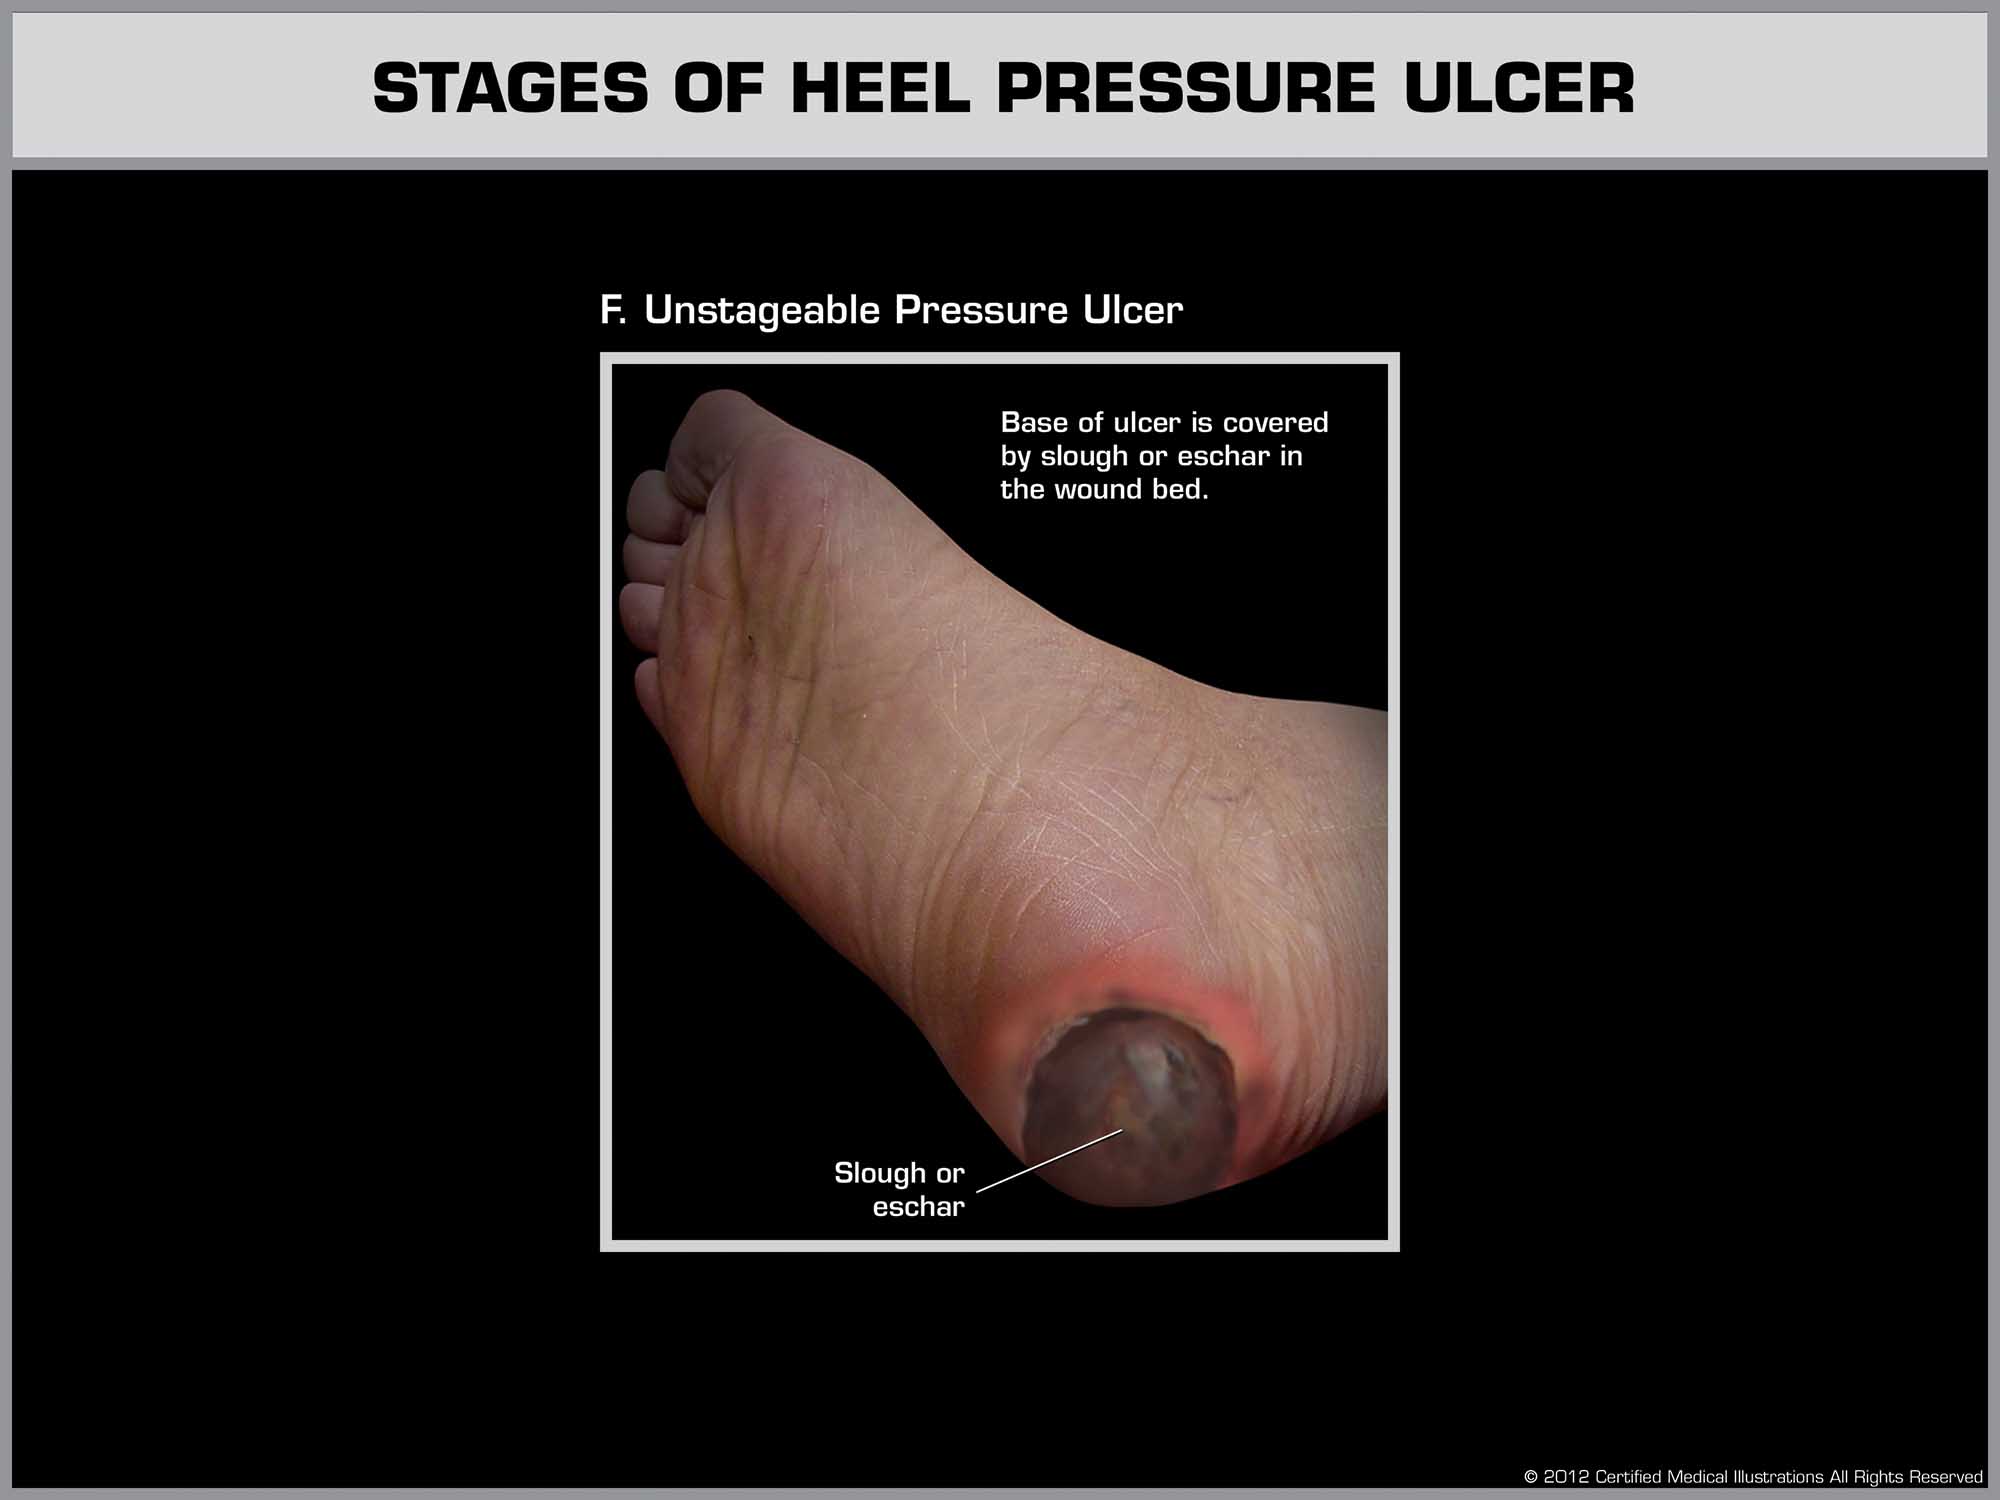 Development of a Heal Ulcer - Unstageable Pressure Ulcer - Law Office of Andrew A. Ballerini